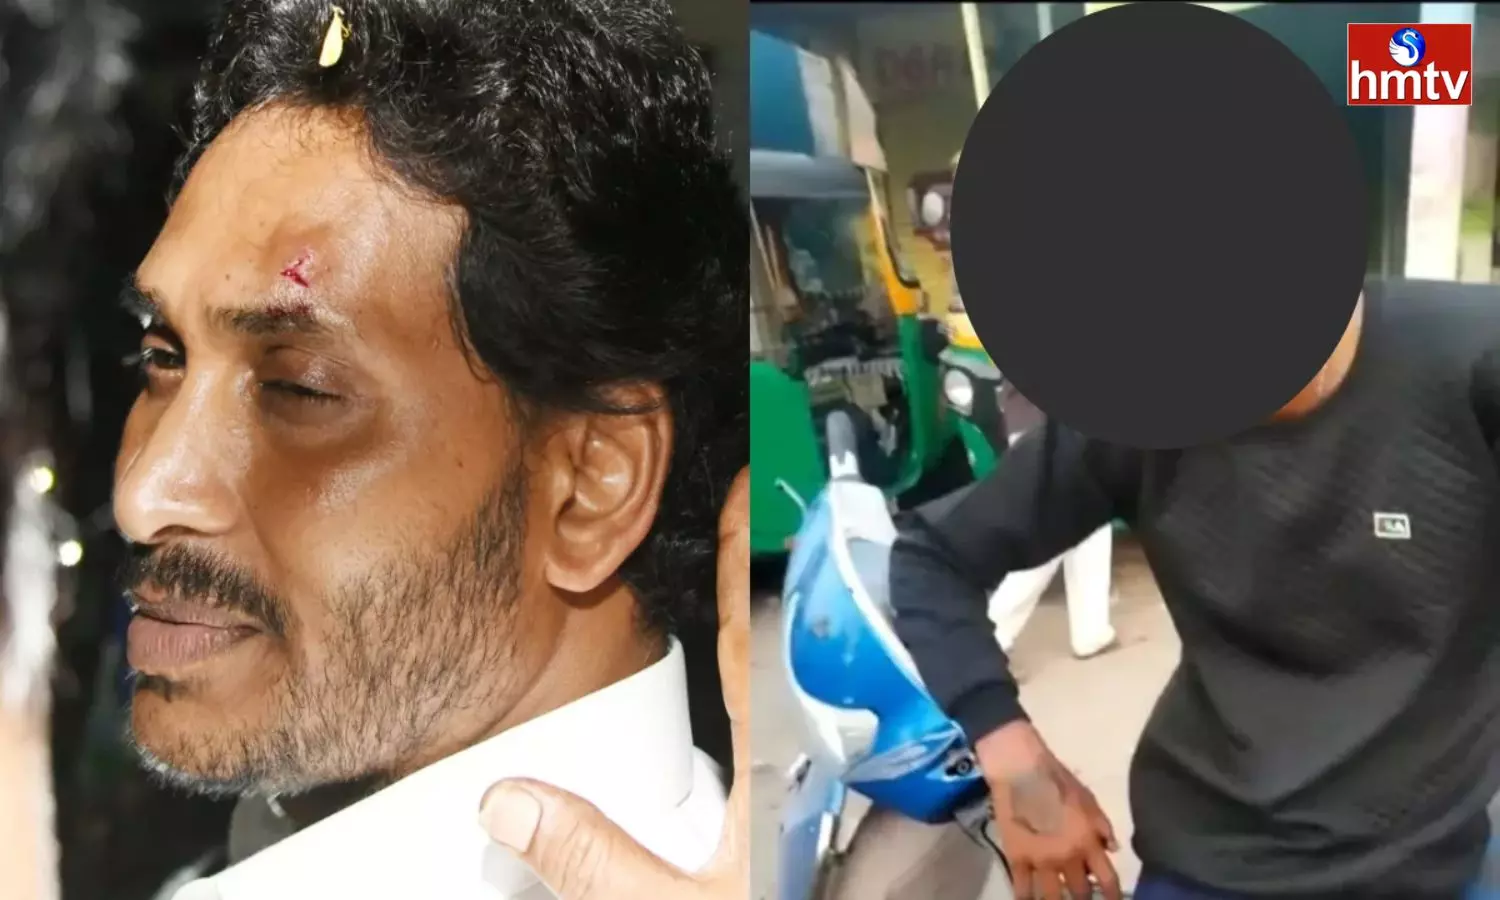 The Person Who Attacked On Jagan Was A Minor